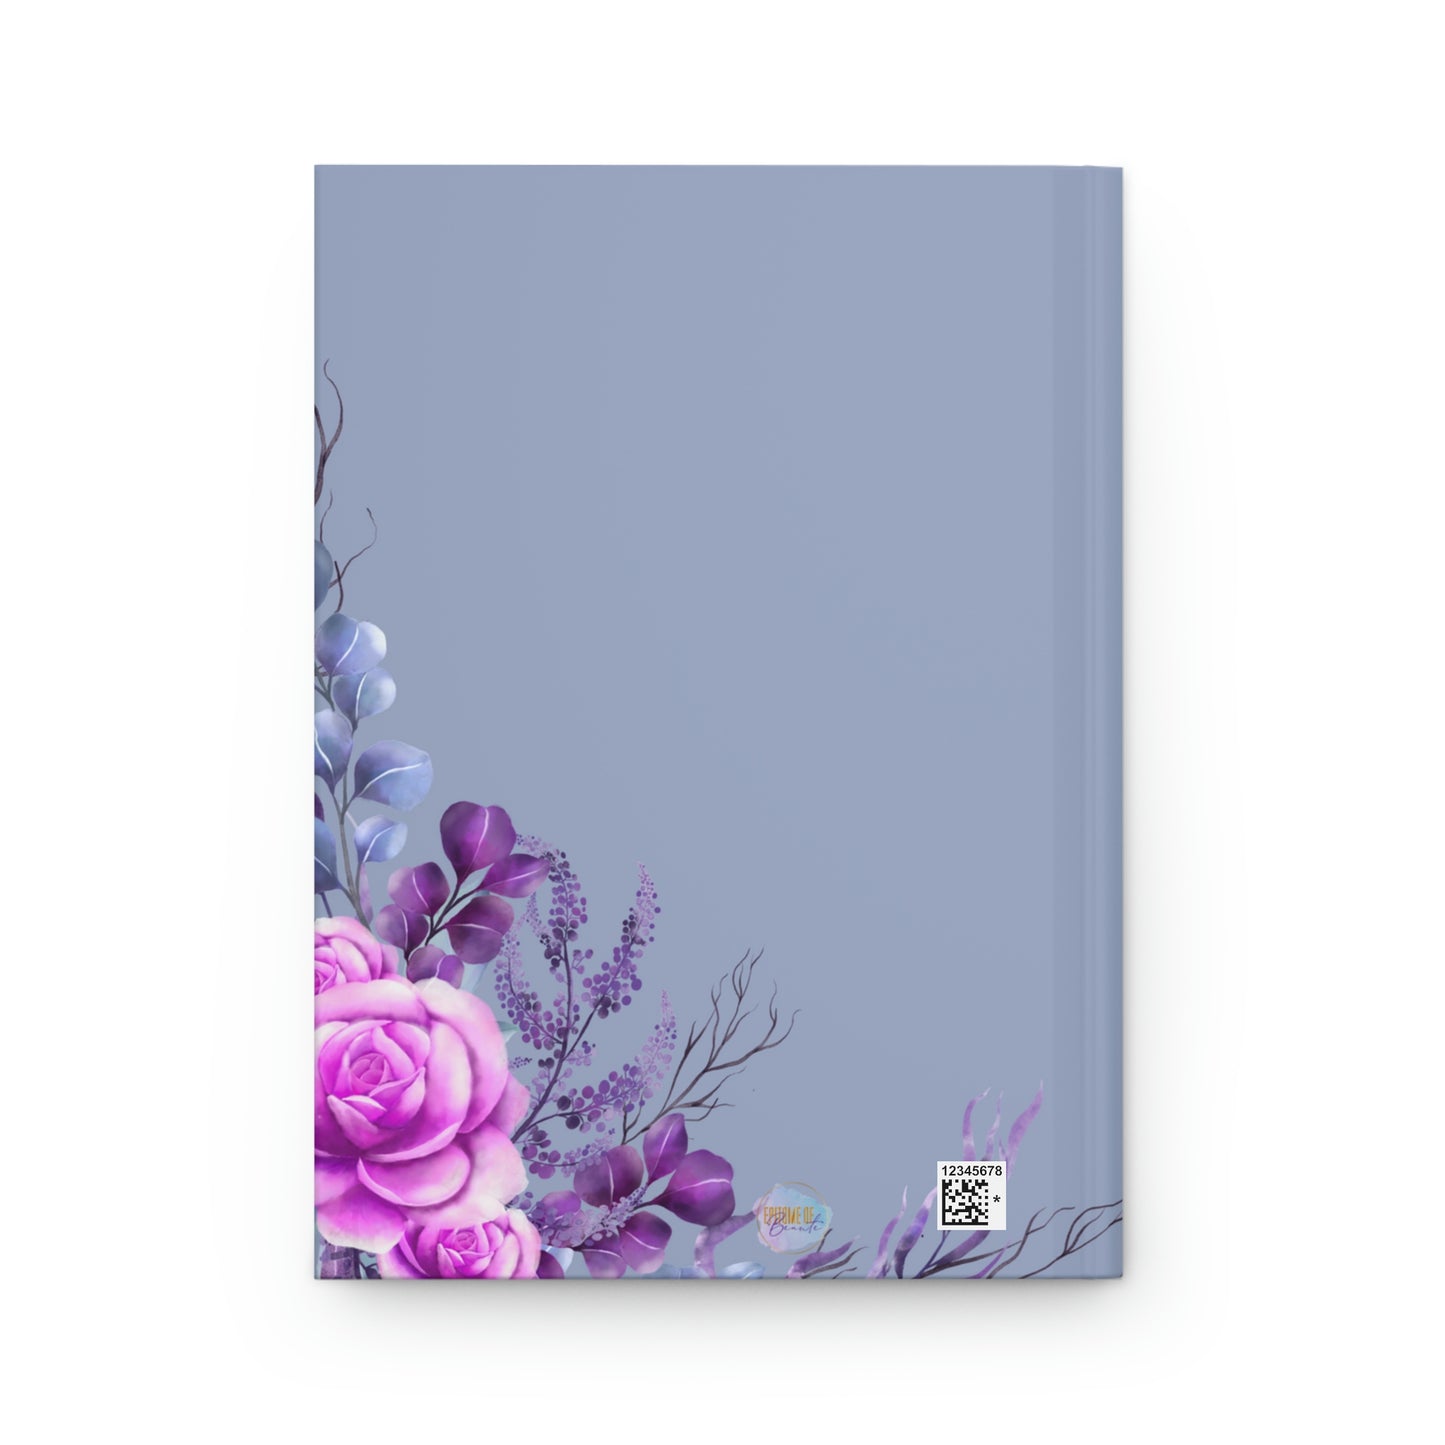 Booked and Busy Purple Floral Hardcover Journal Matte